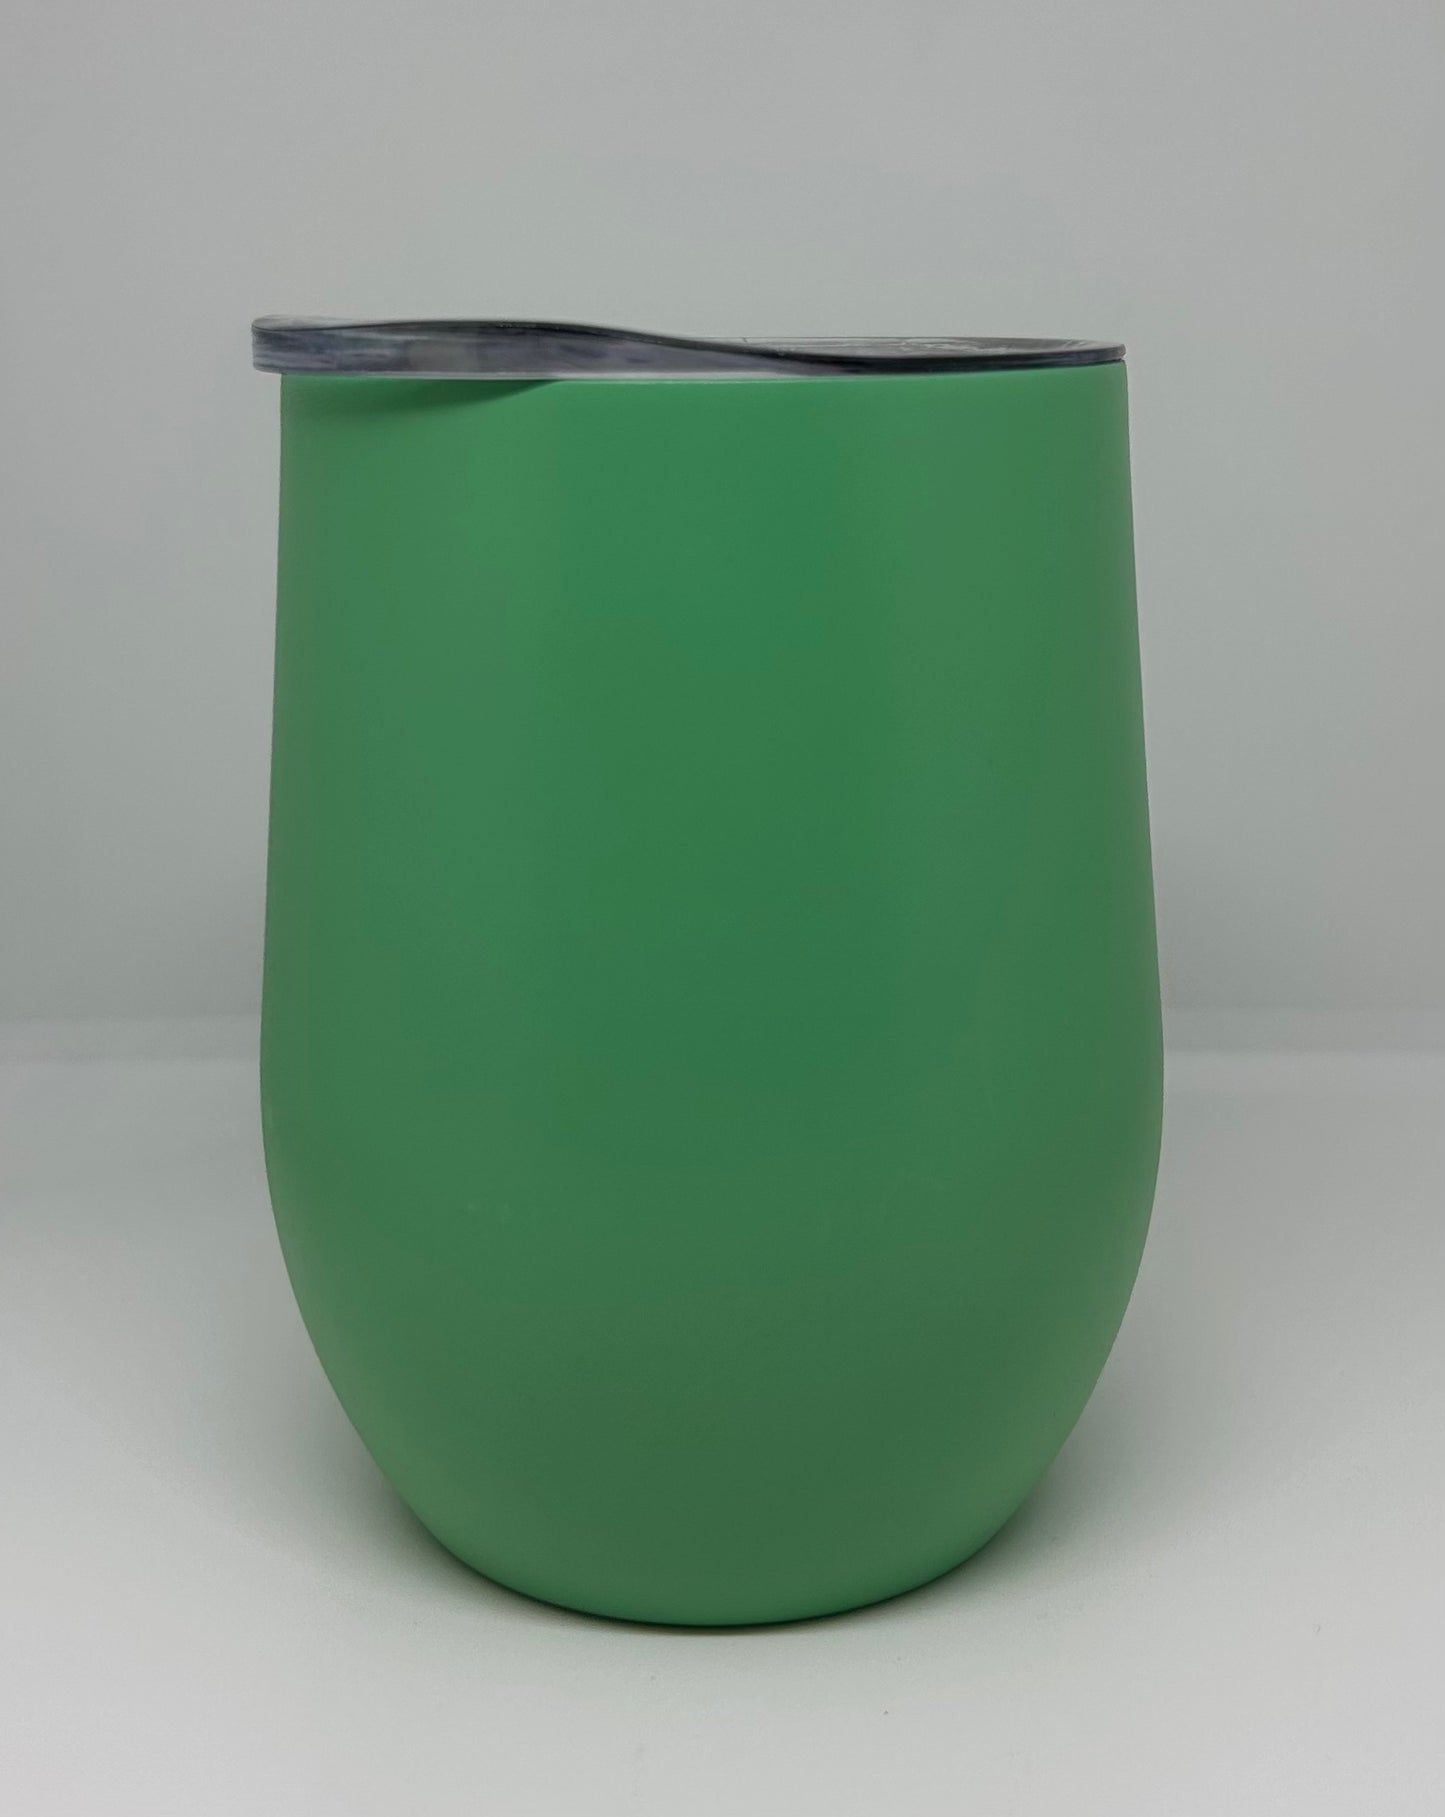 12 oz Wine Tumbler Green to Green Glow Stainless Steel